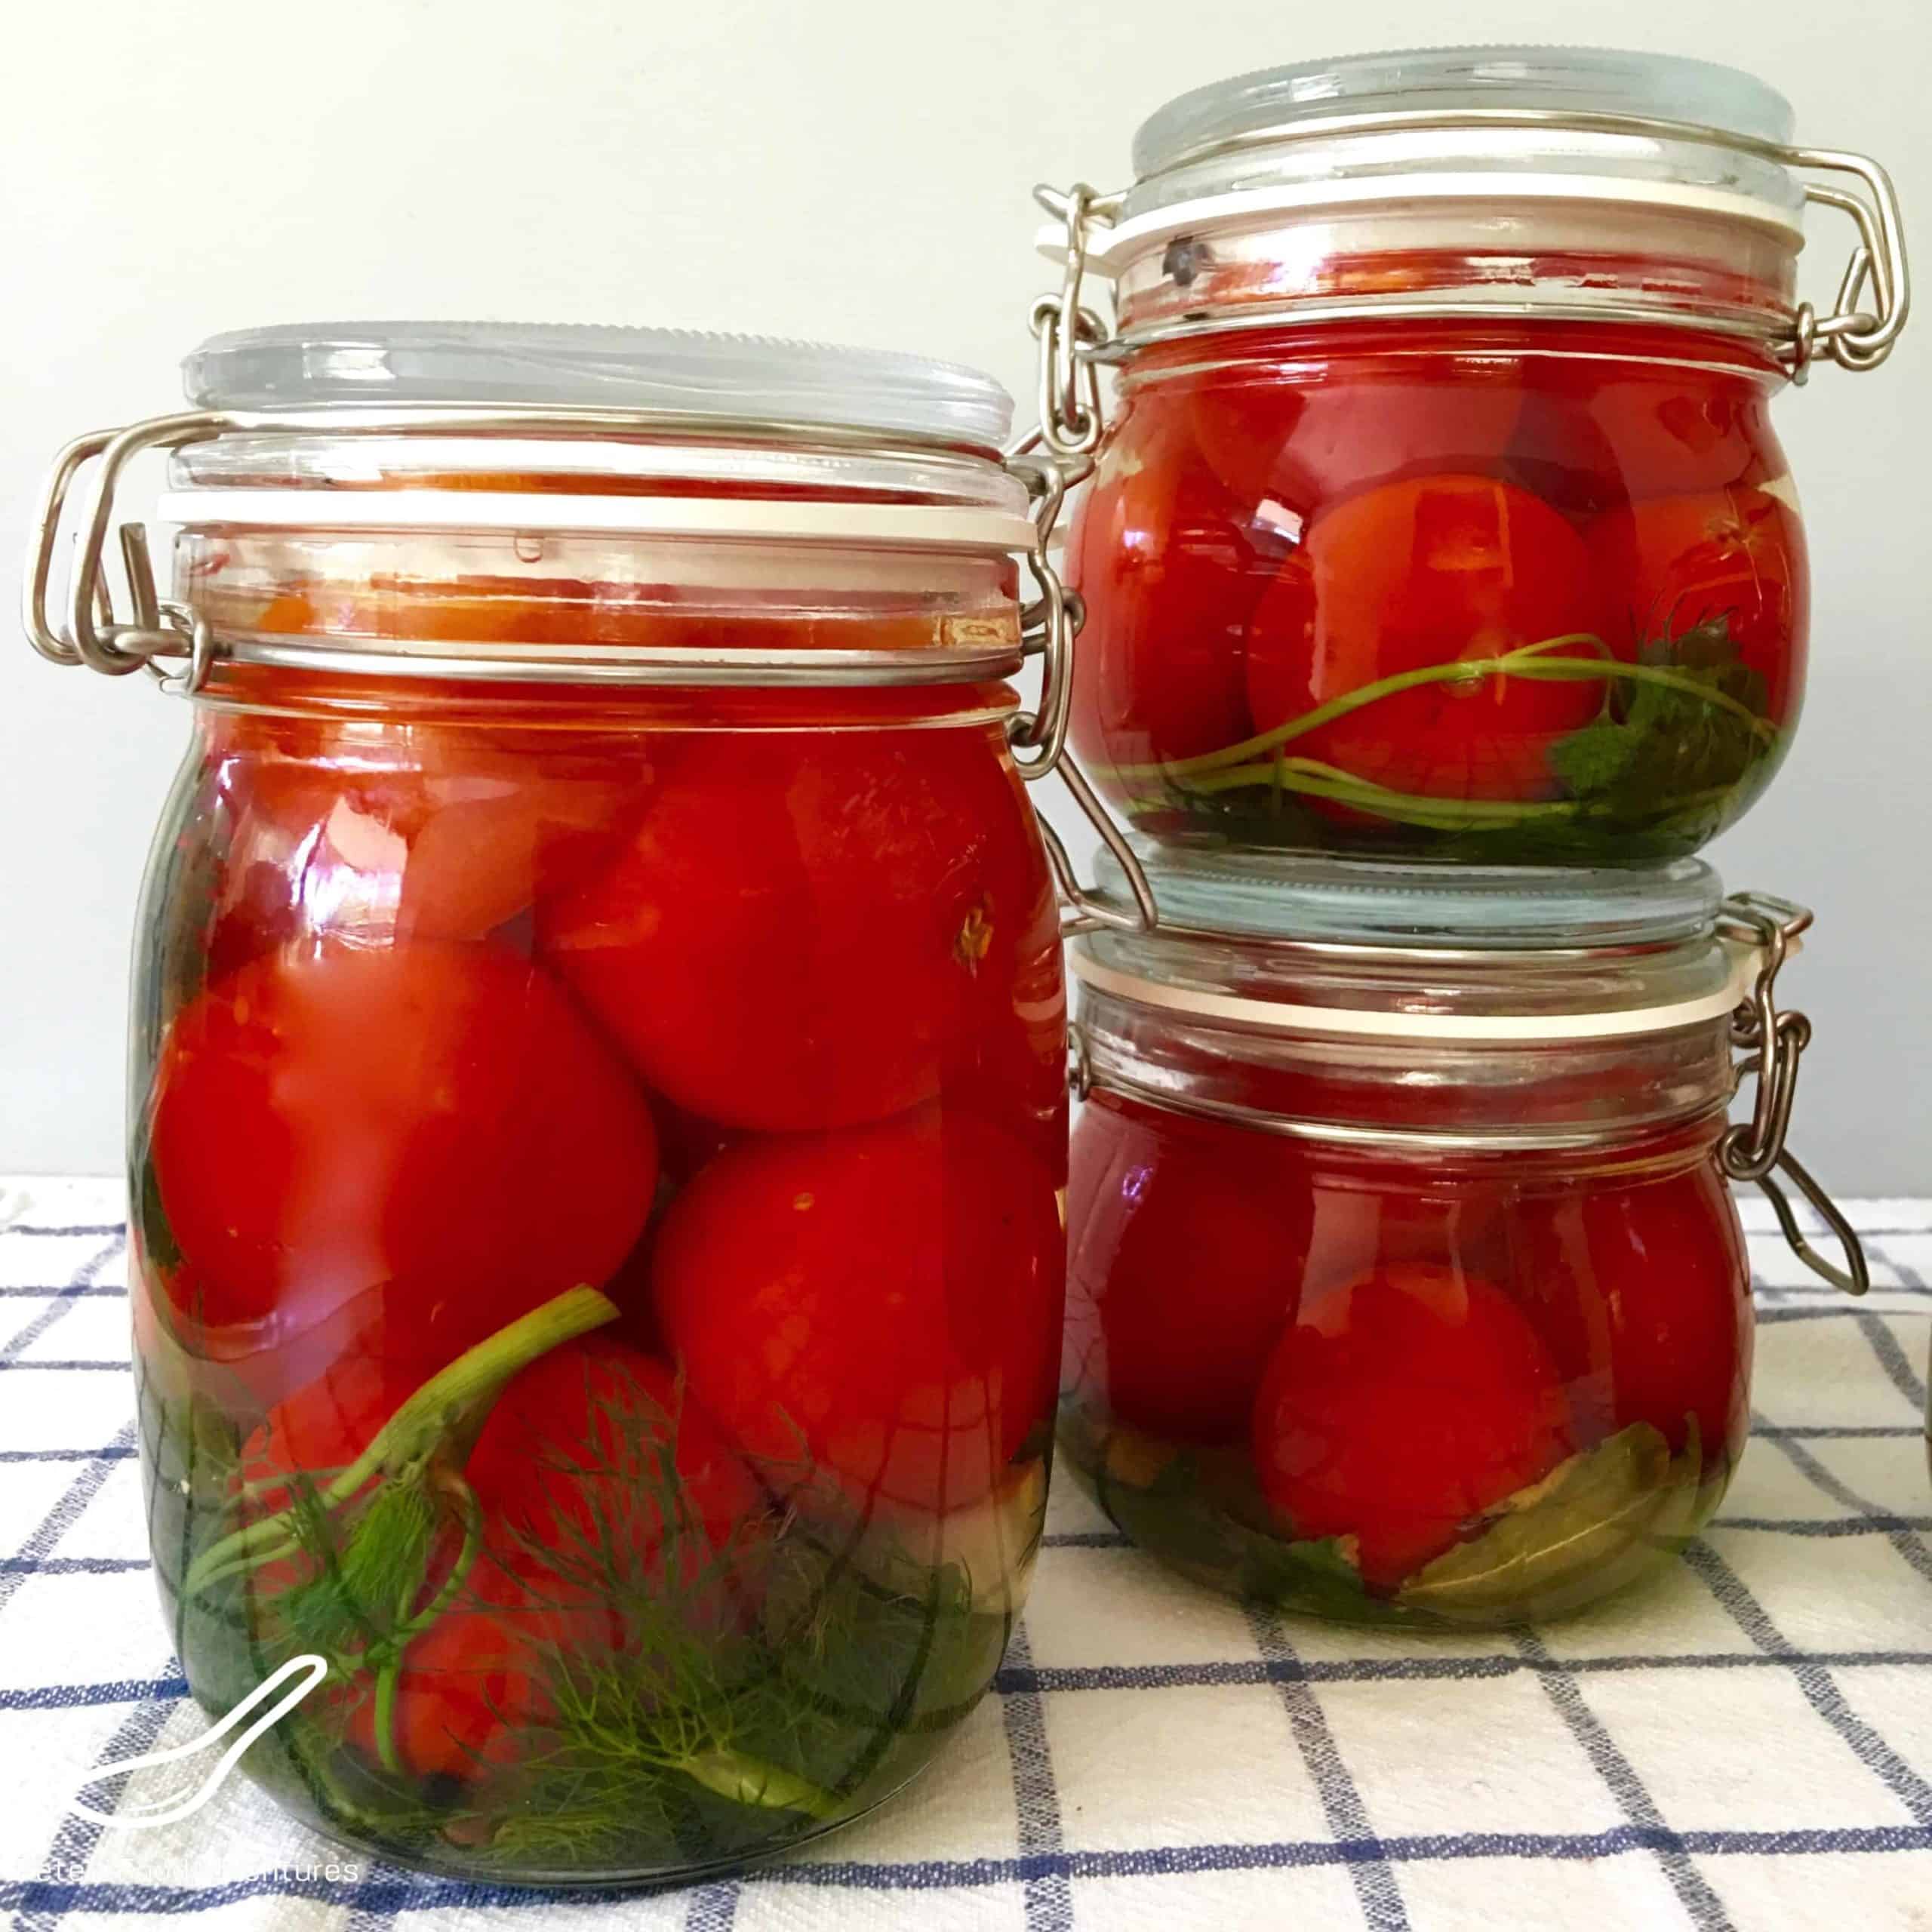 This traditional way of preserving or fermenting tomatoes has been used in Russia for hundreds of years. From my babushka to your kitchen! Fermented Pickled Tomatoes (солёные помидоры)